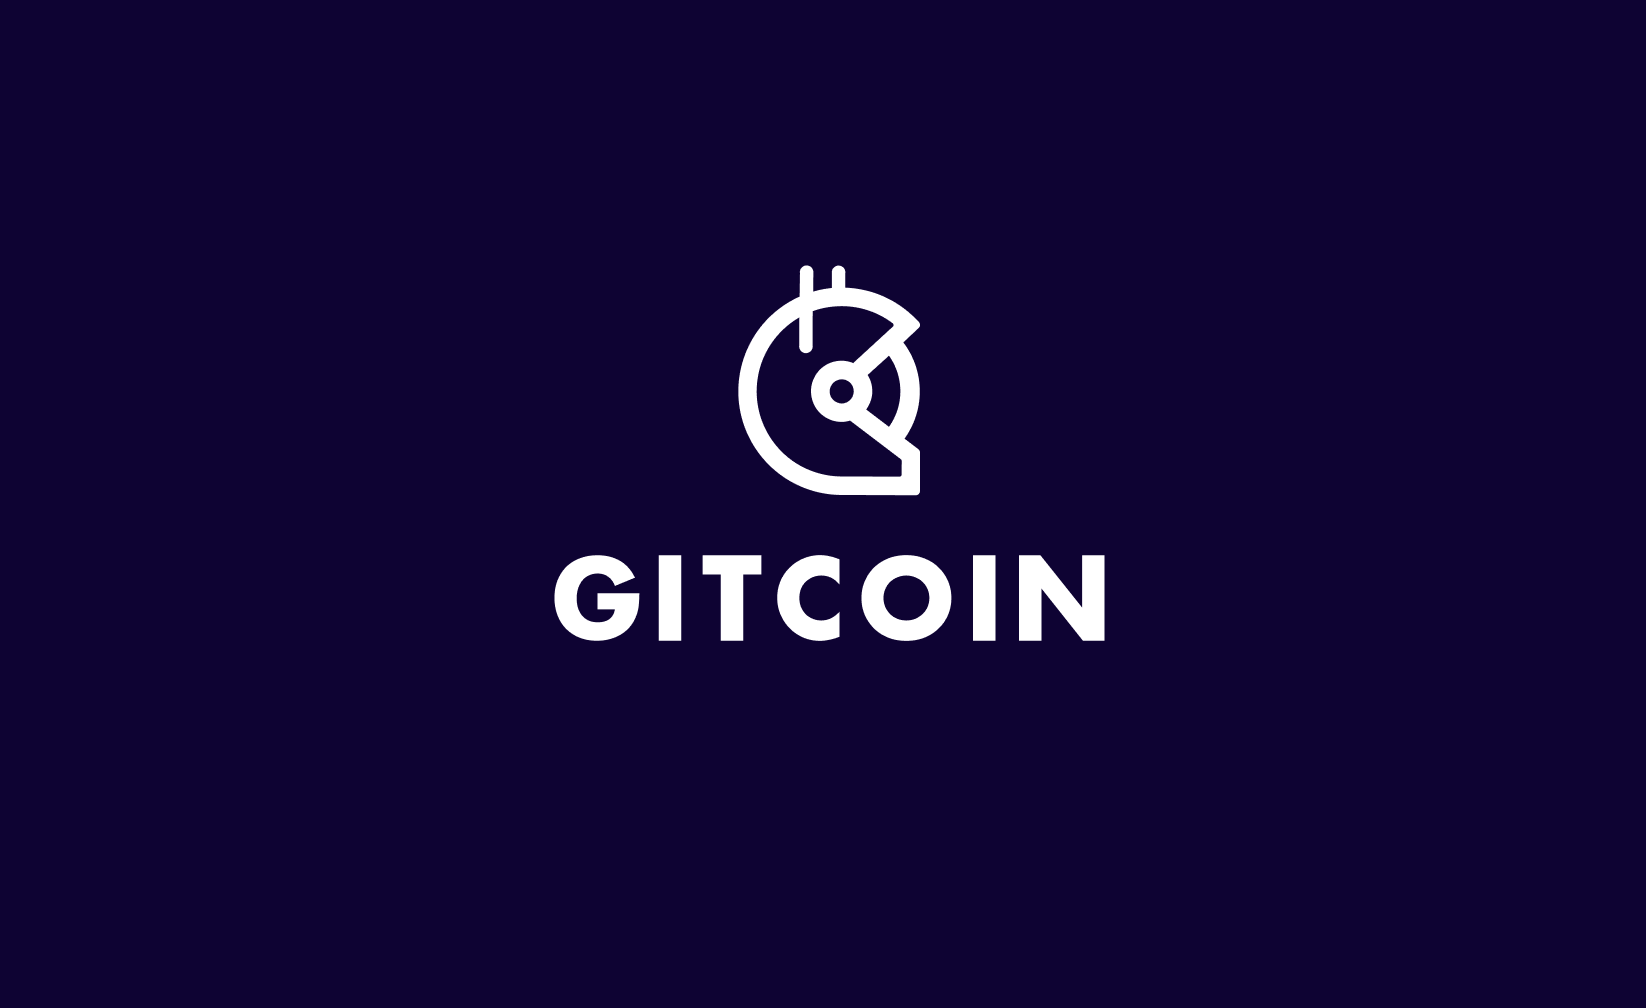 Gitcoin raises $11.3 million for treasury, goes independent from ConsenSys